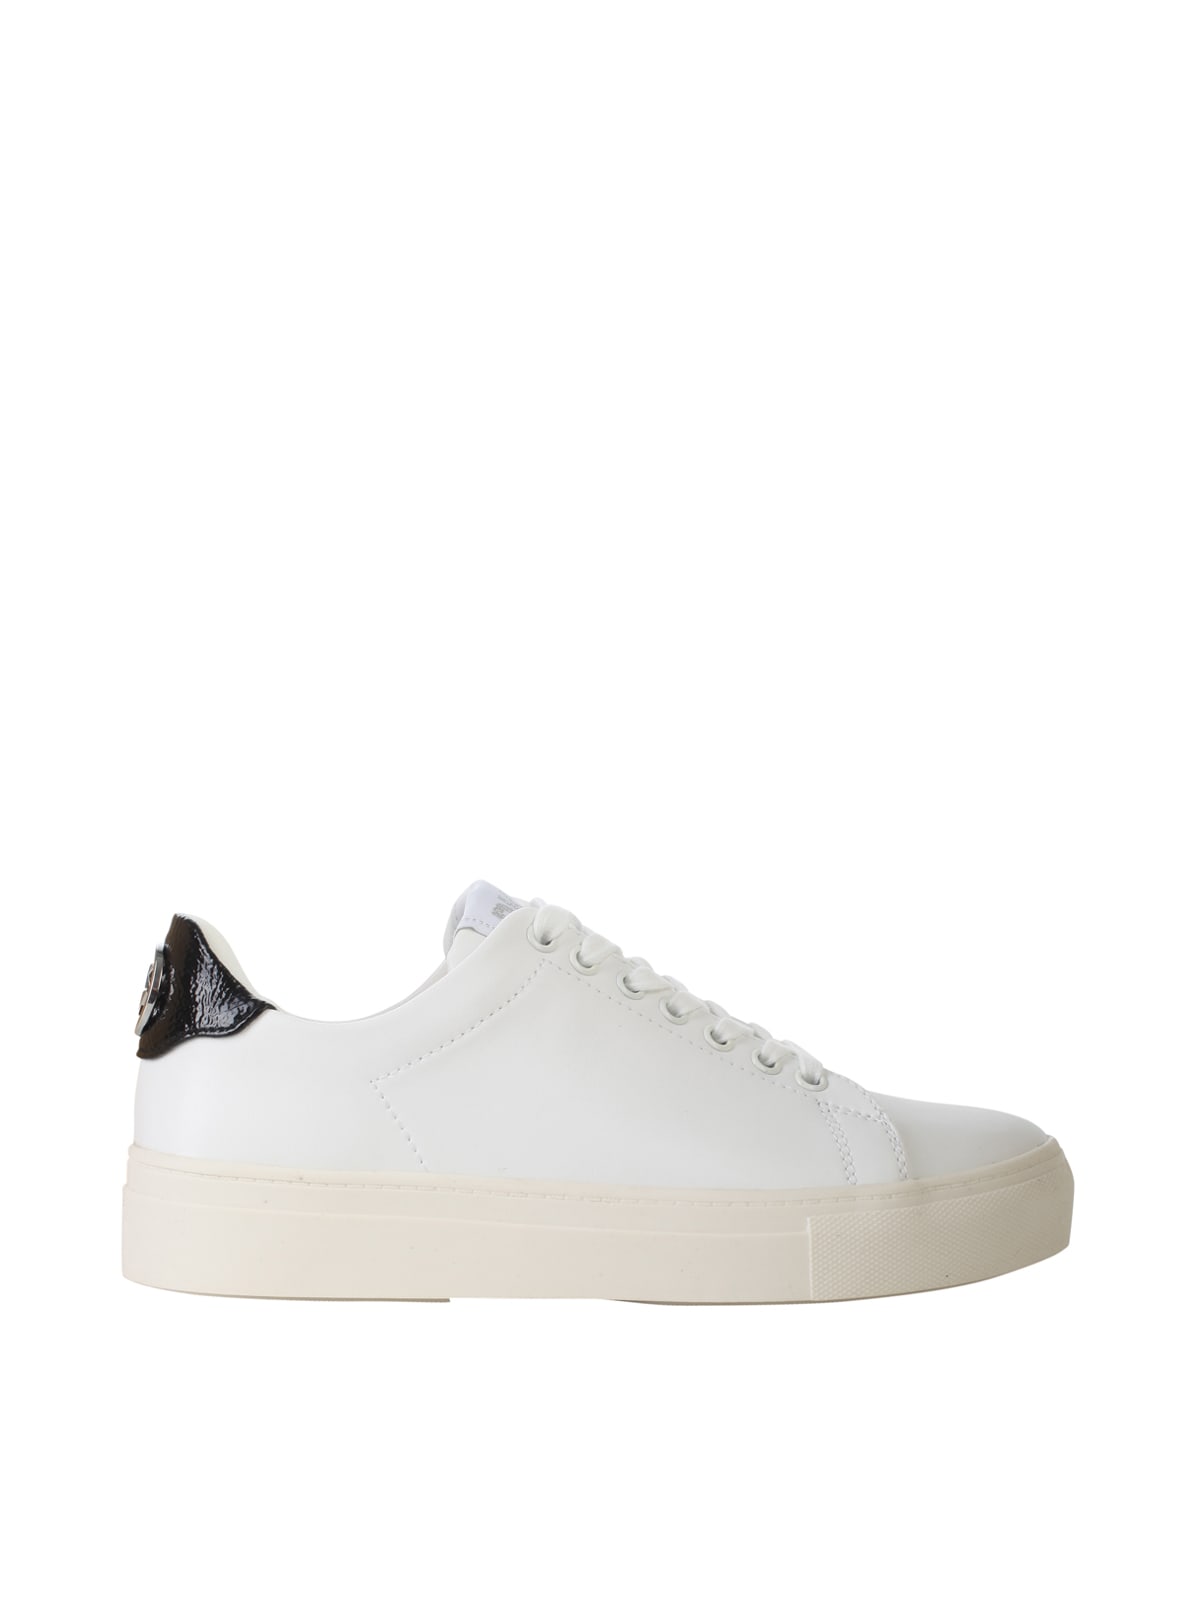 DKNY Tumbled Leather Grainy Patent Pu Chambers Lace Up Sneaker 35mm